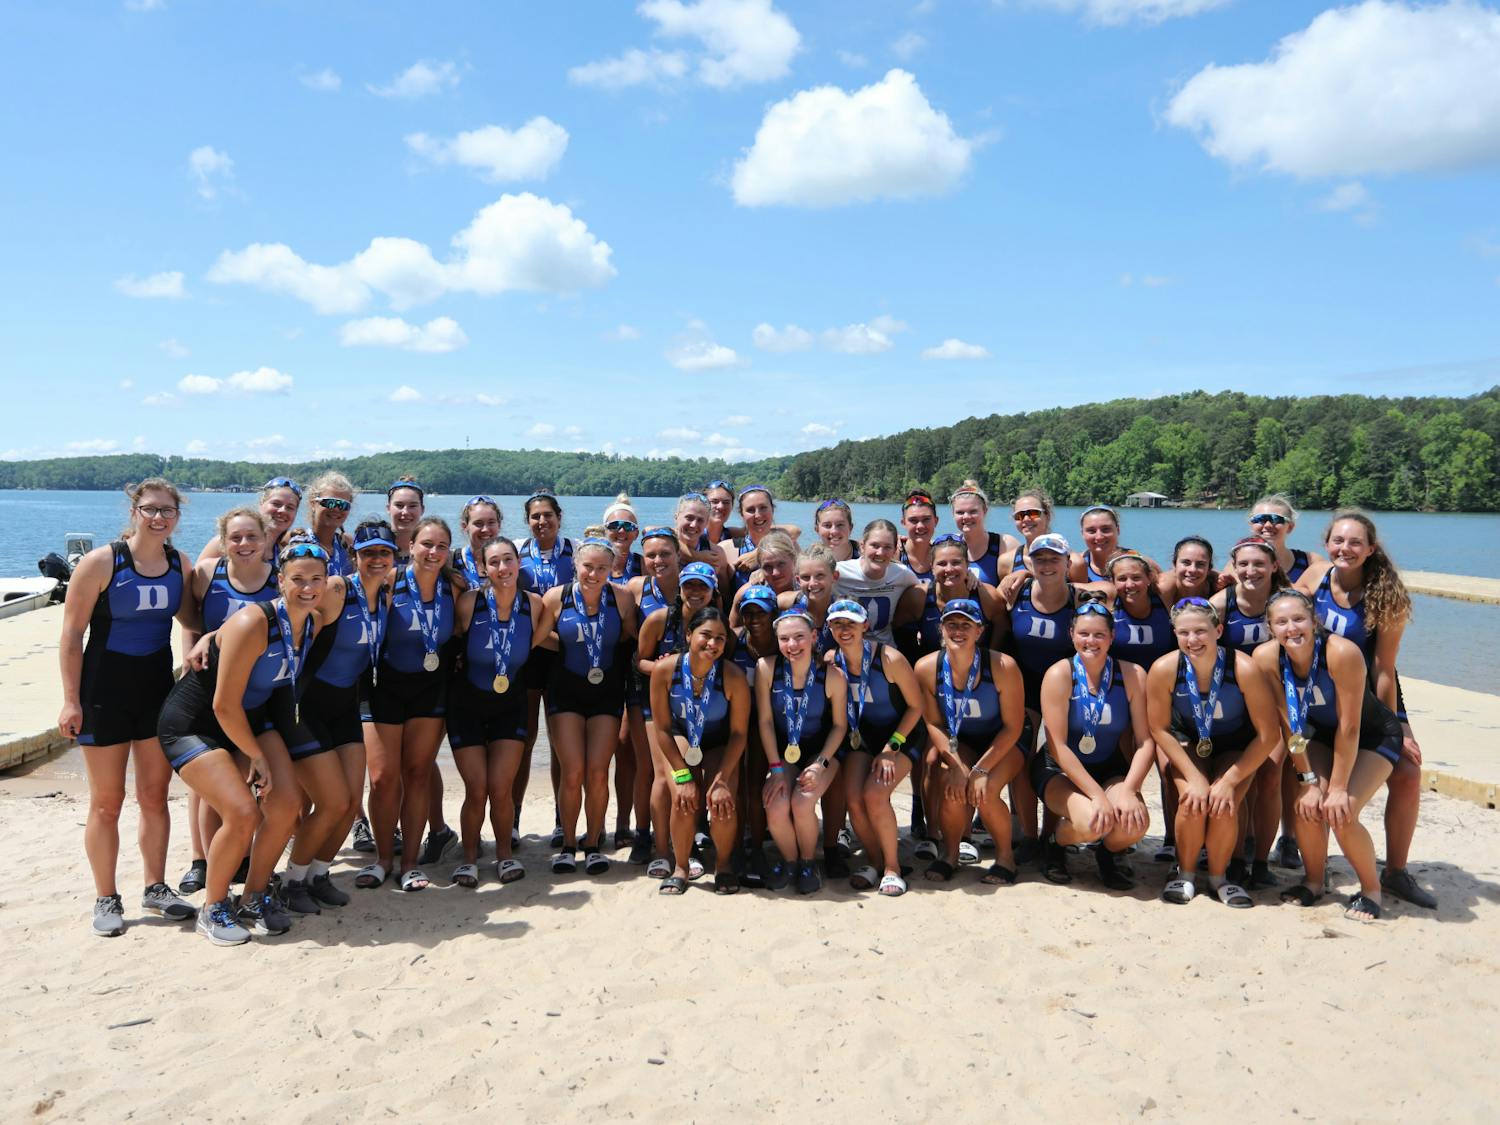 Duke placed third at the ACC Championship in Clemson, S.C.